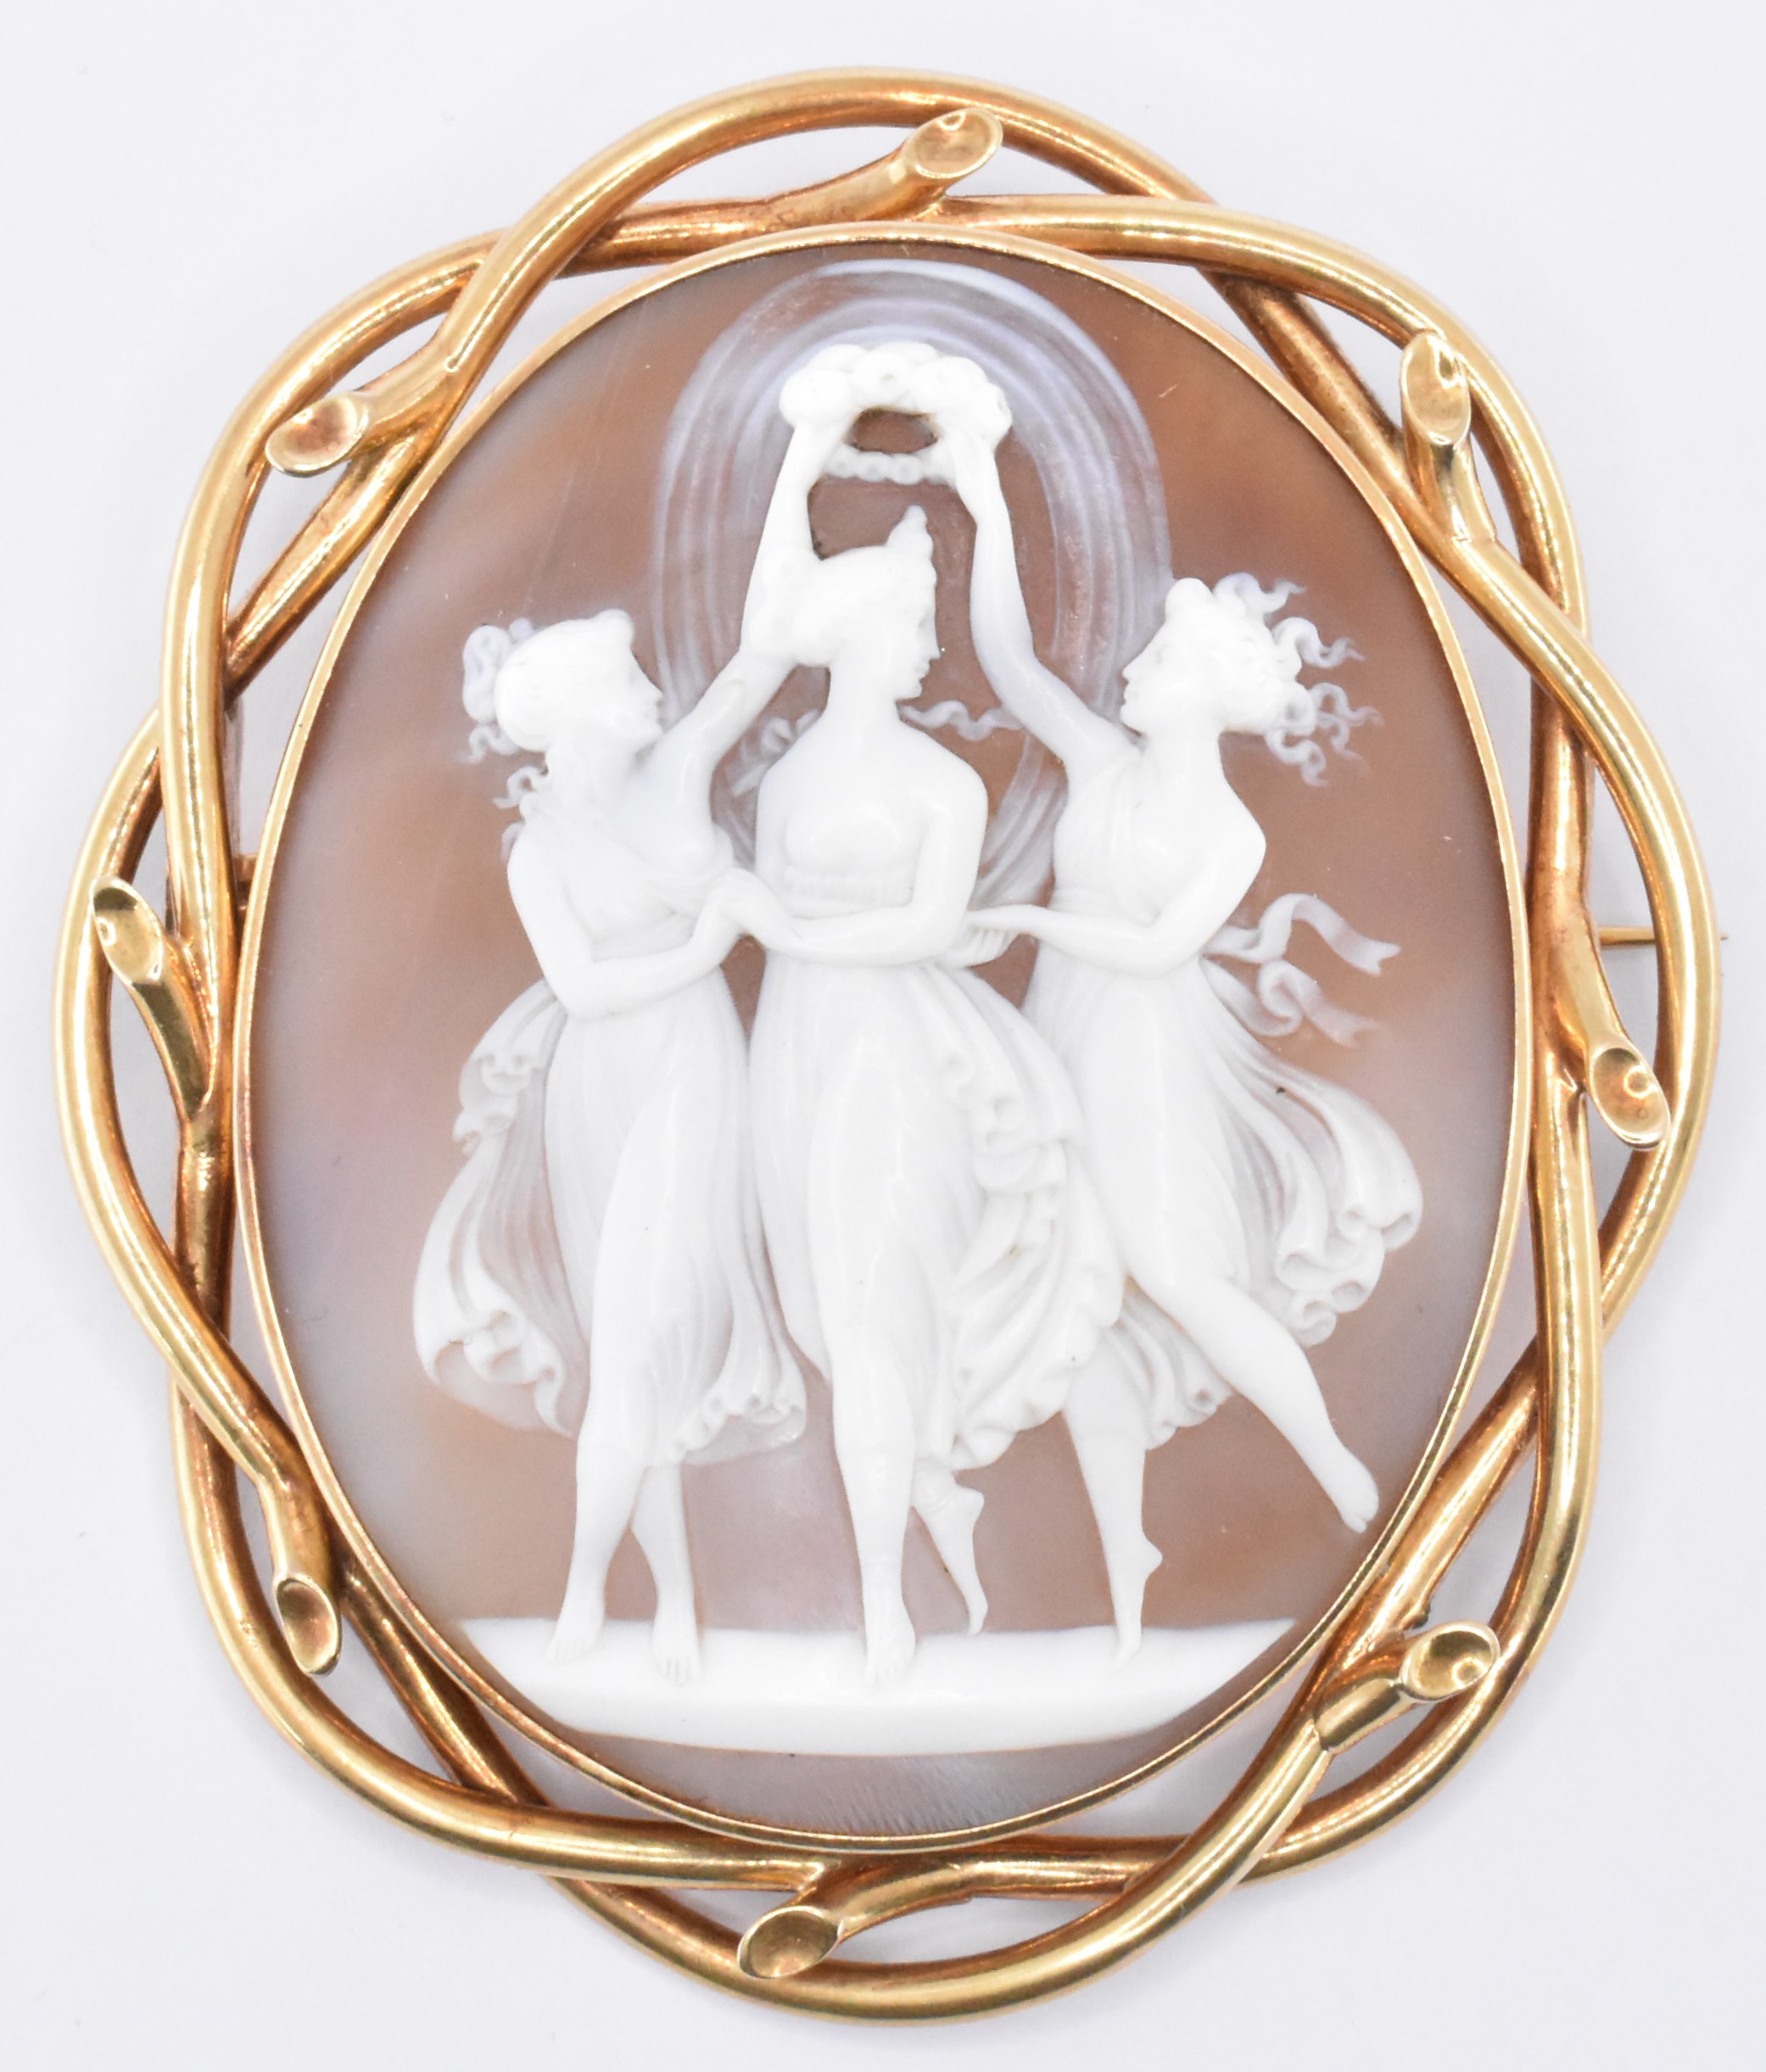 VICTORIAN GOLD & SHELL CAMEO BROOCH - Image 2 of 5